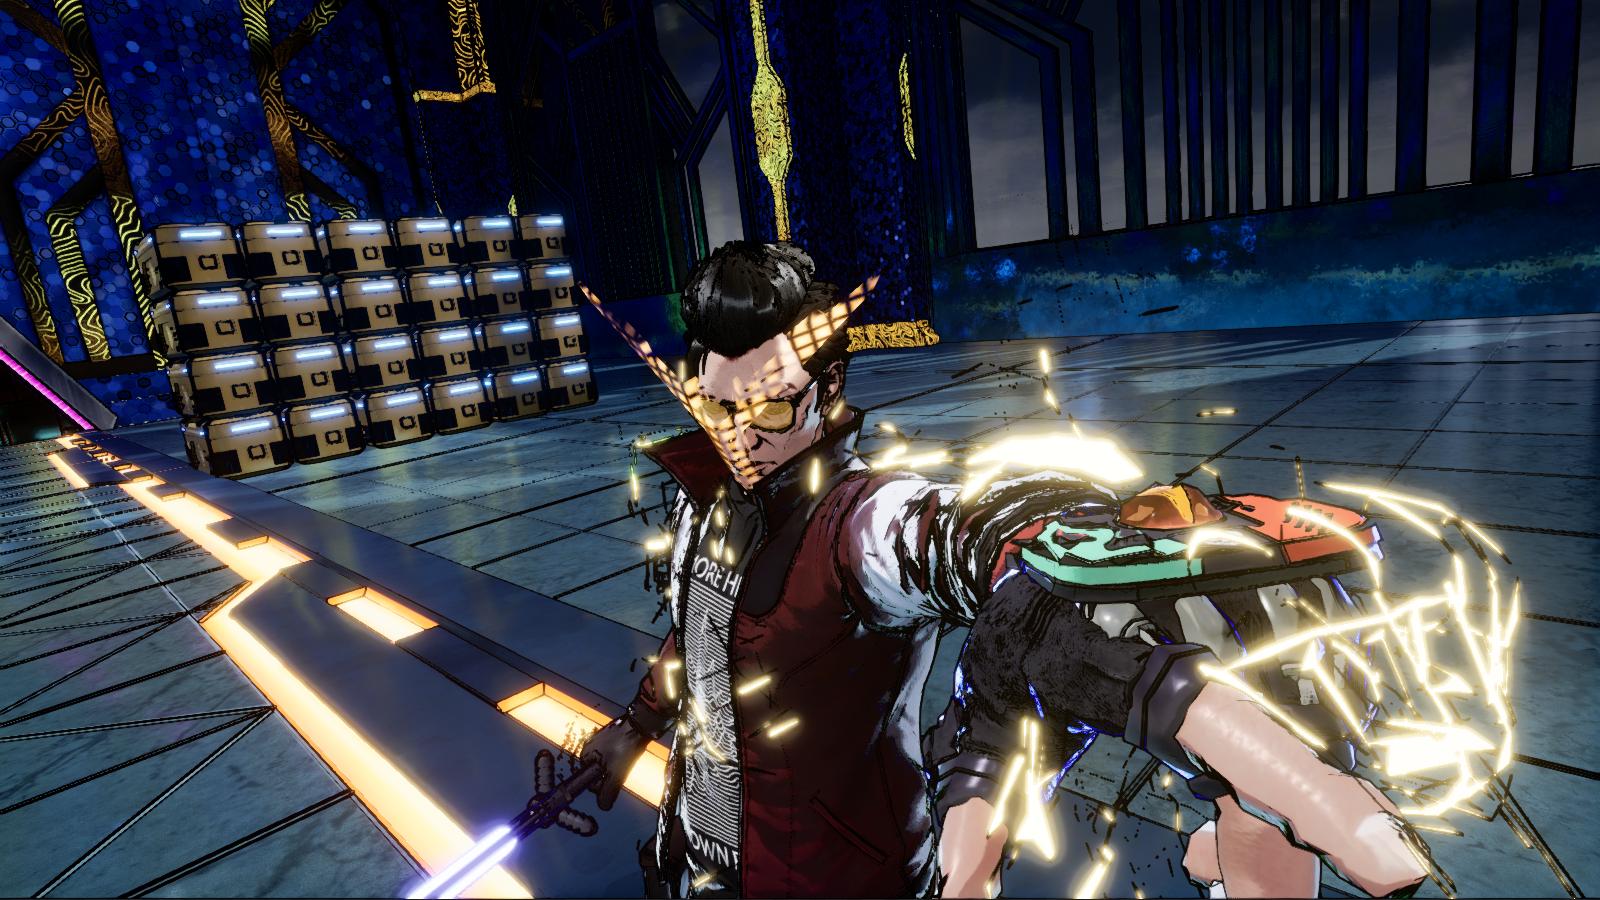 No More Heroes 3 Gets Lots of New Screenshots Showing Fighting, Characters, Santa Destroy, & More